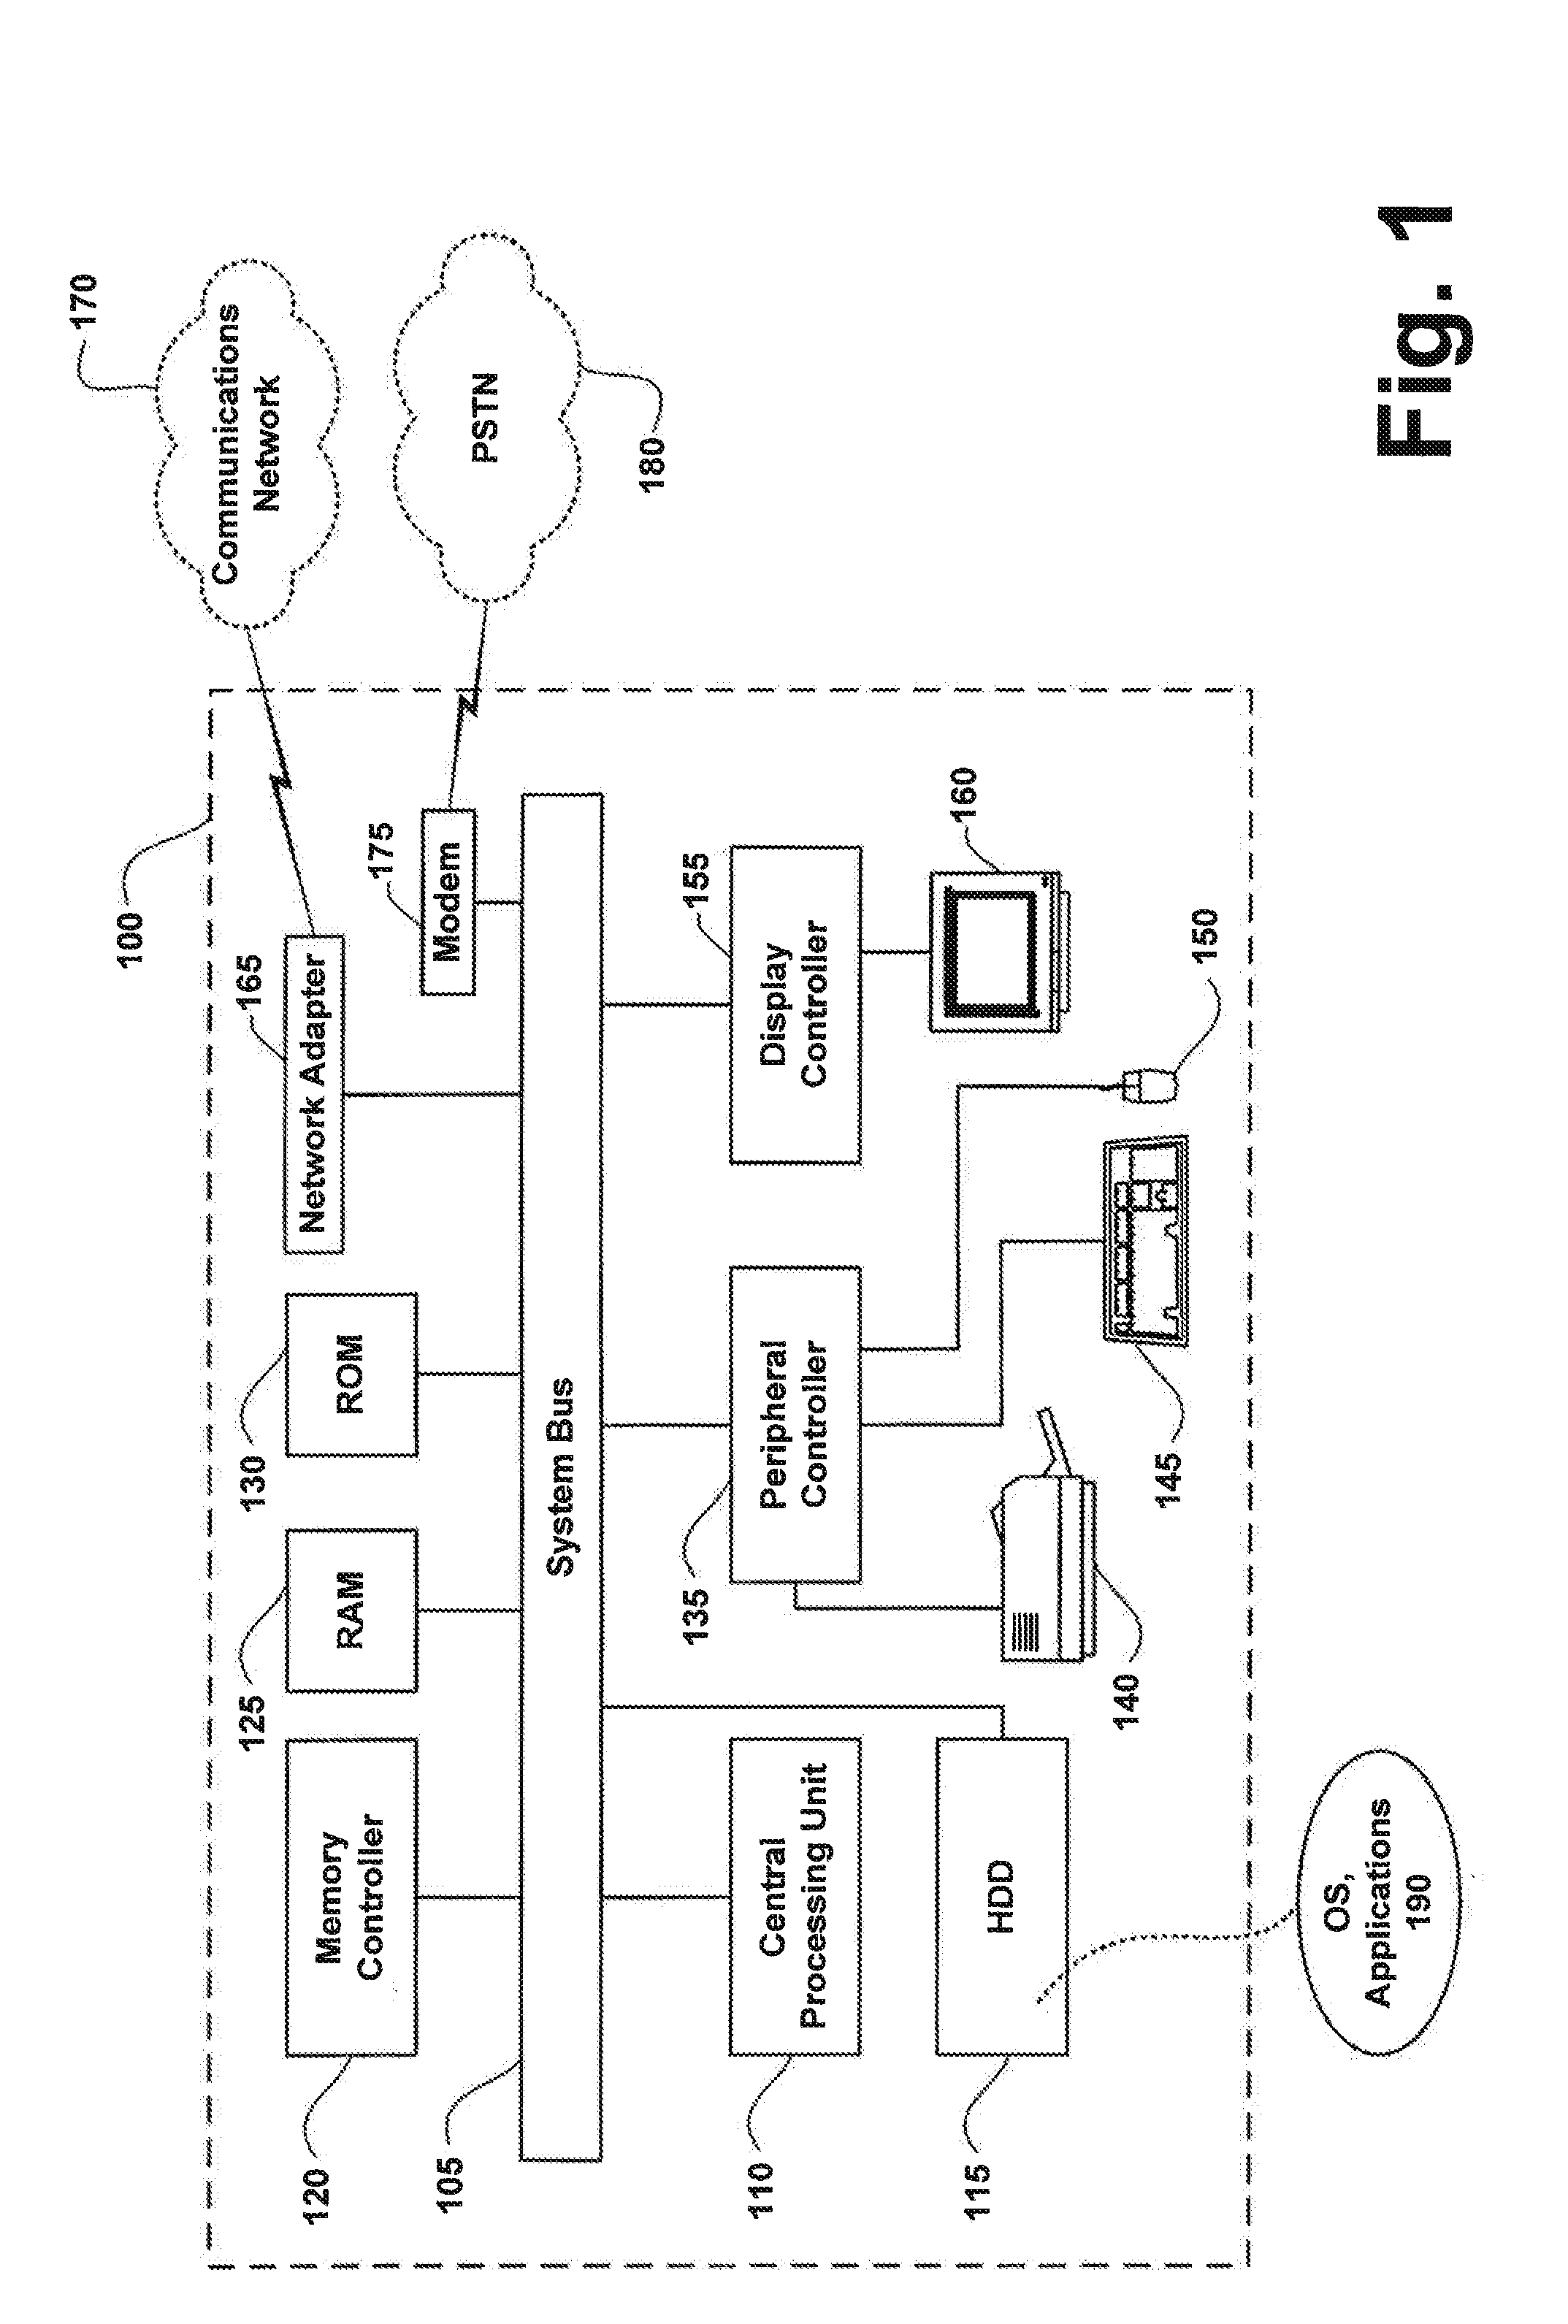 System and method for promoting and tracking physical activity among a participating group of individuals